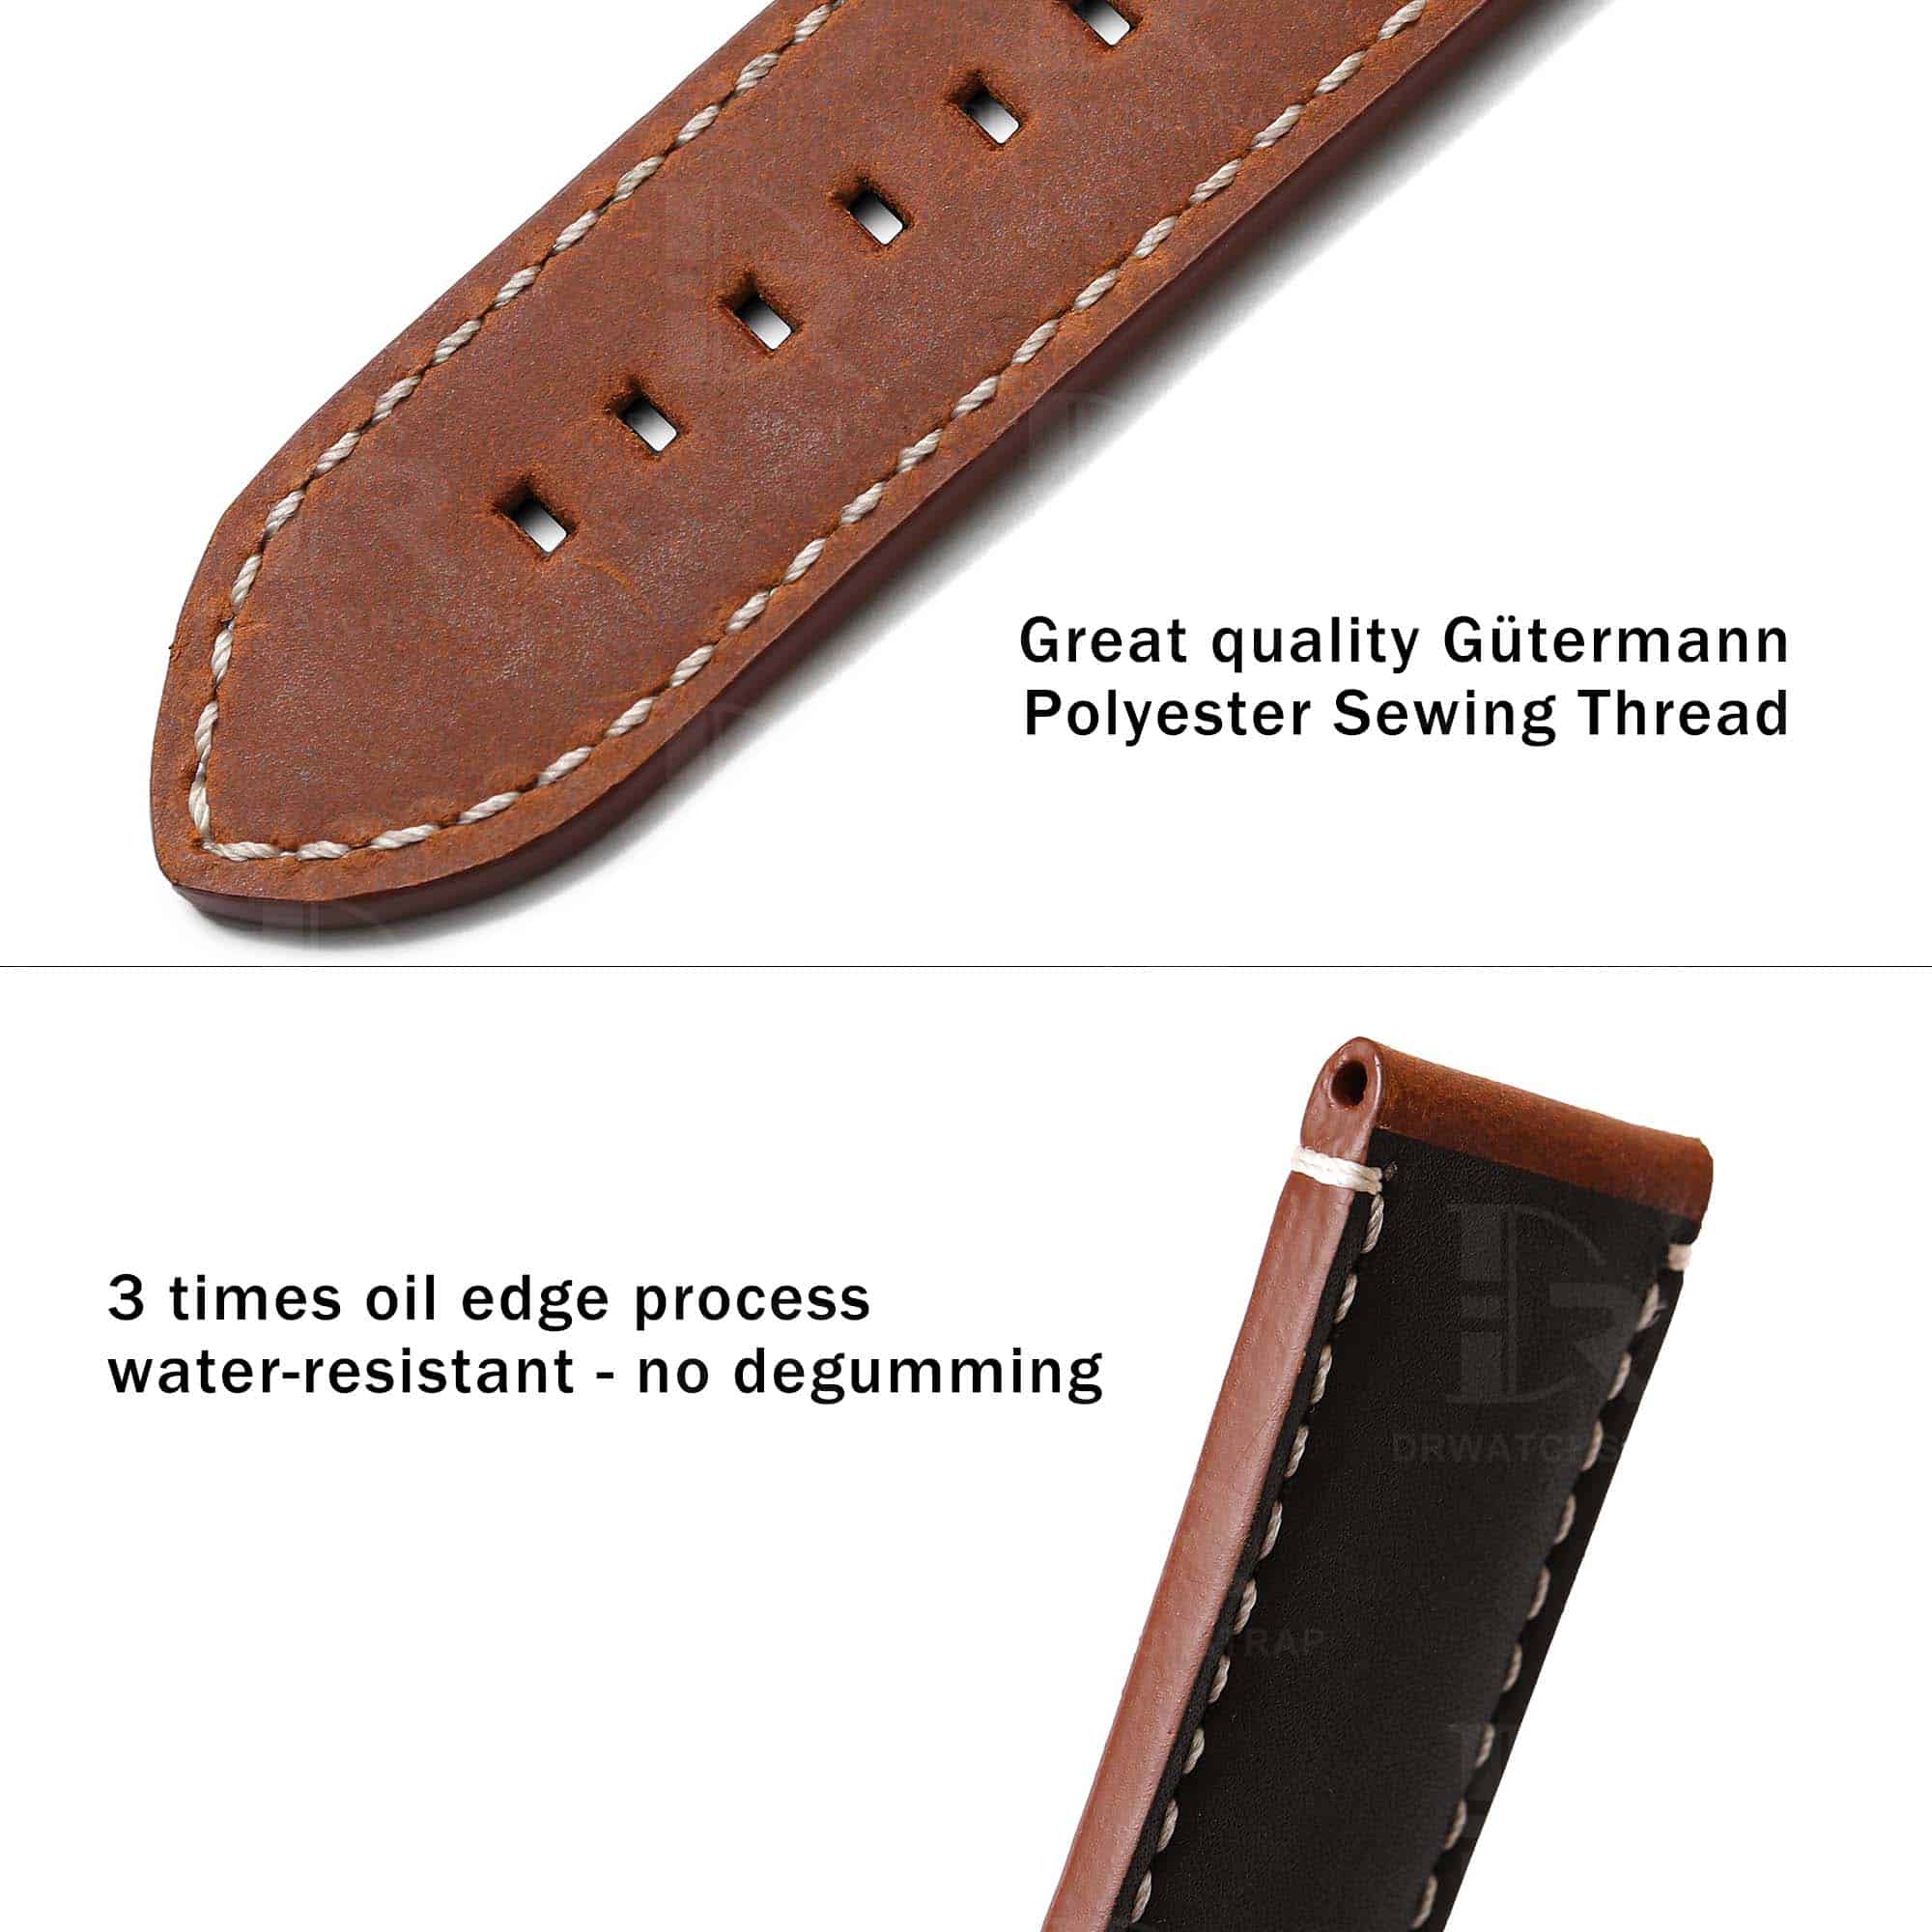 Custom best quality material brown vintage suede replacement Tudor leather watch bands and straps for Tudor Black Bay 58 41 Bronze luxury watches - Shop the OEM handmade leather strap online at a low price